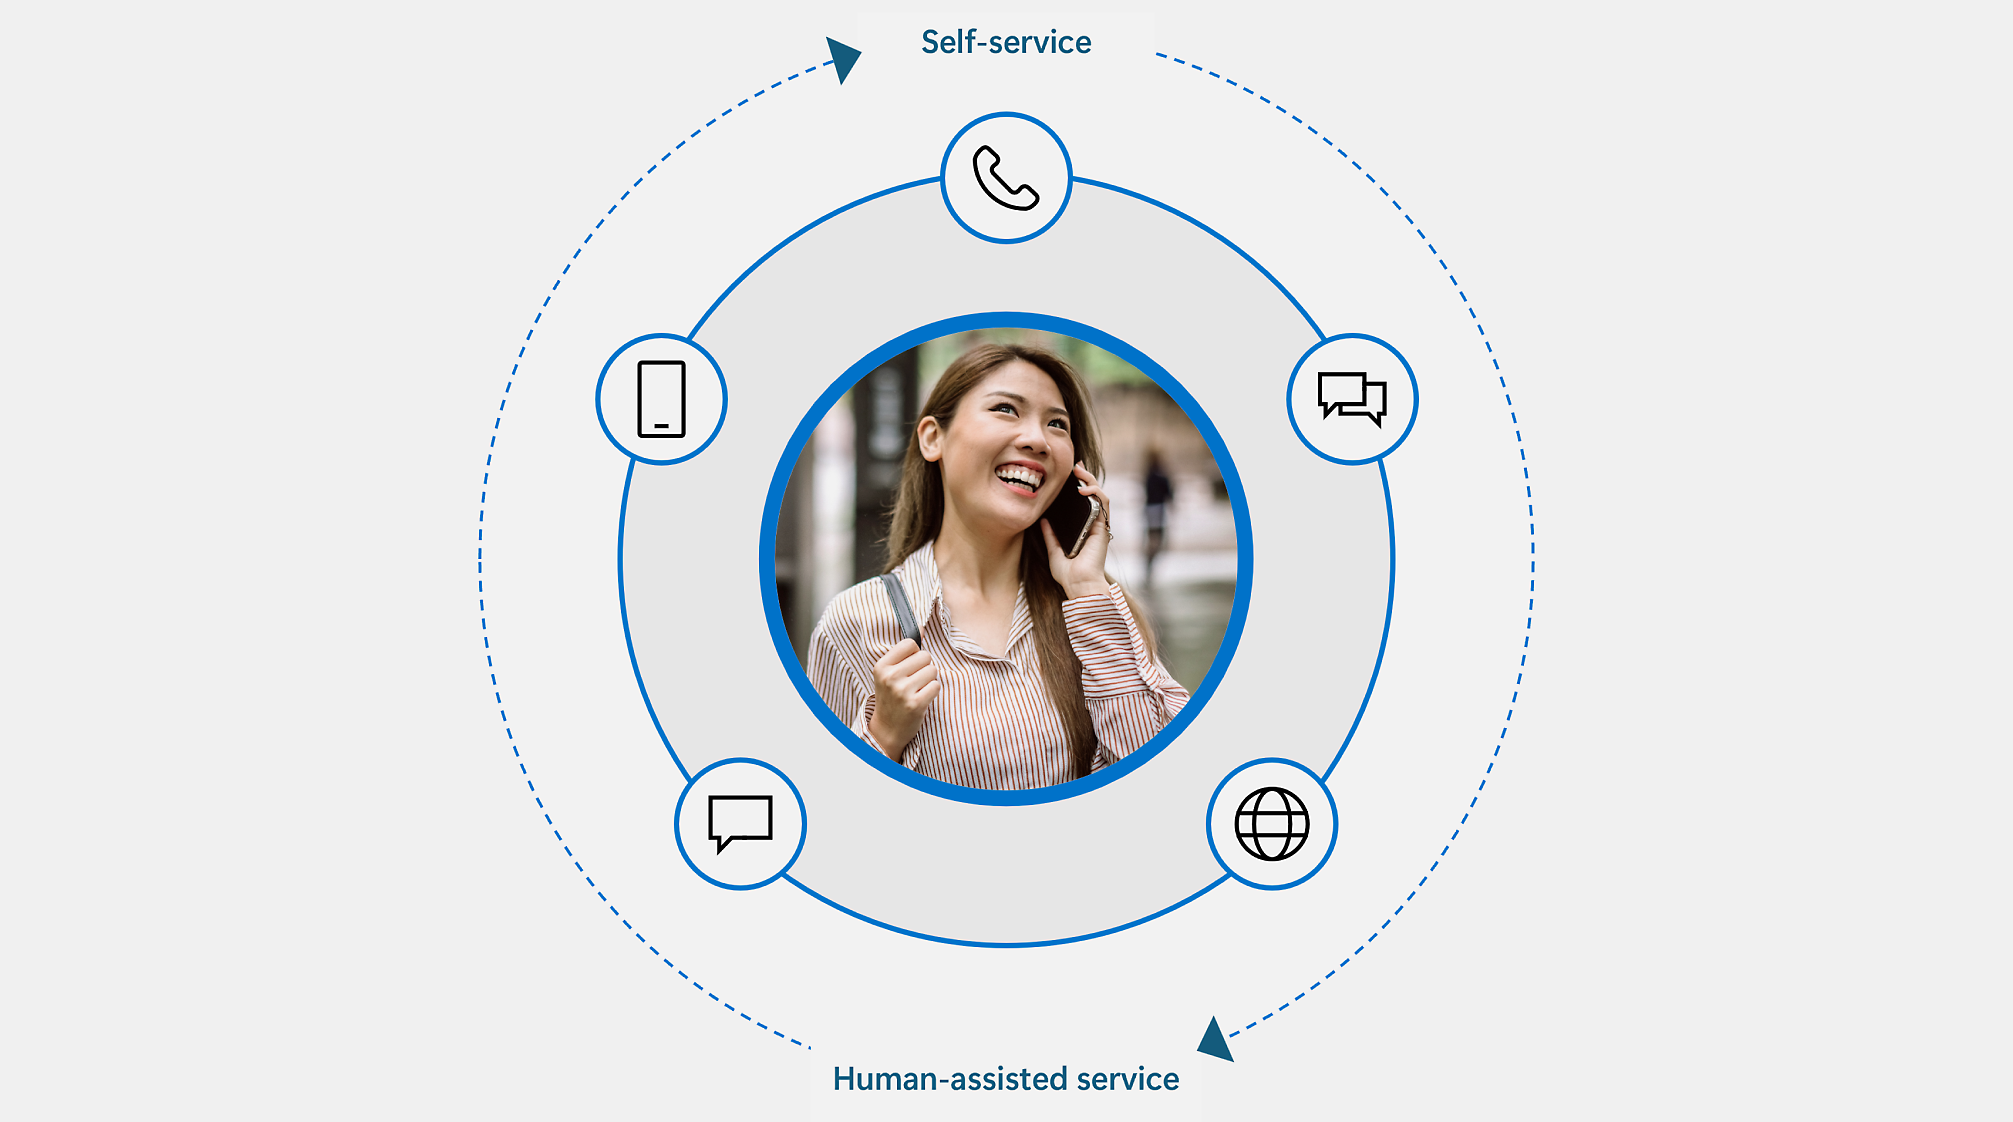 Woman smiling on phone in center of infographic with icons for phone, chat, email, and internet.